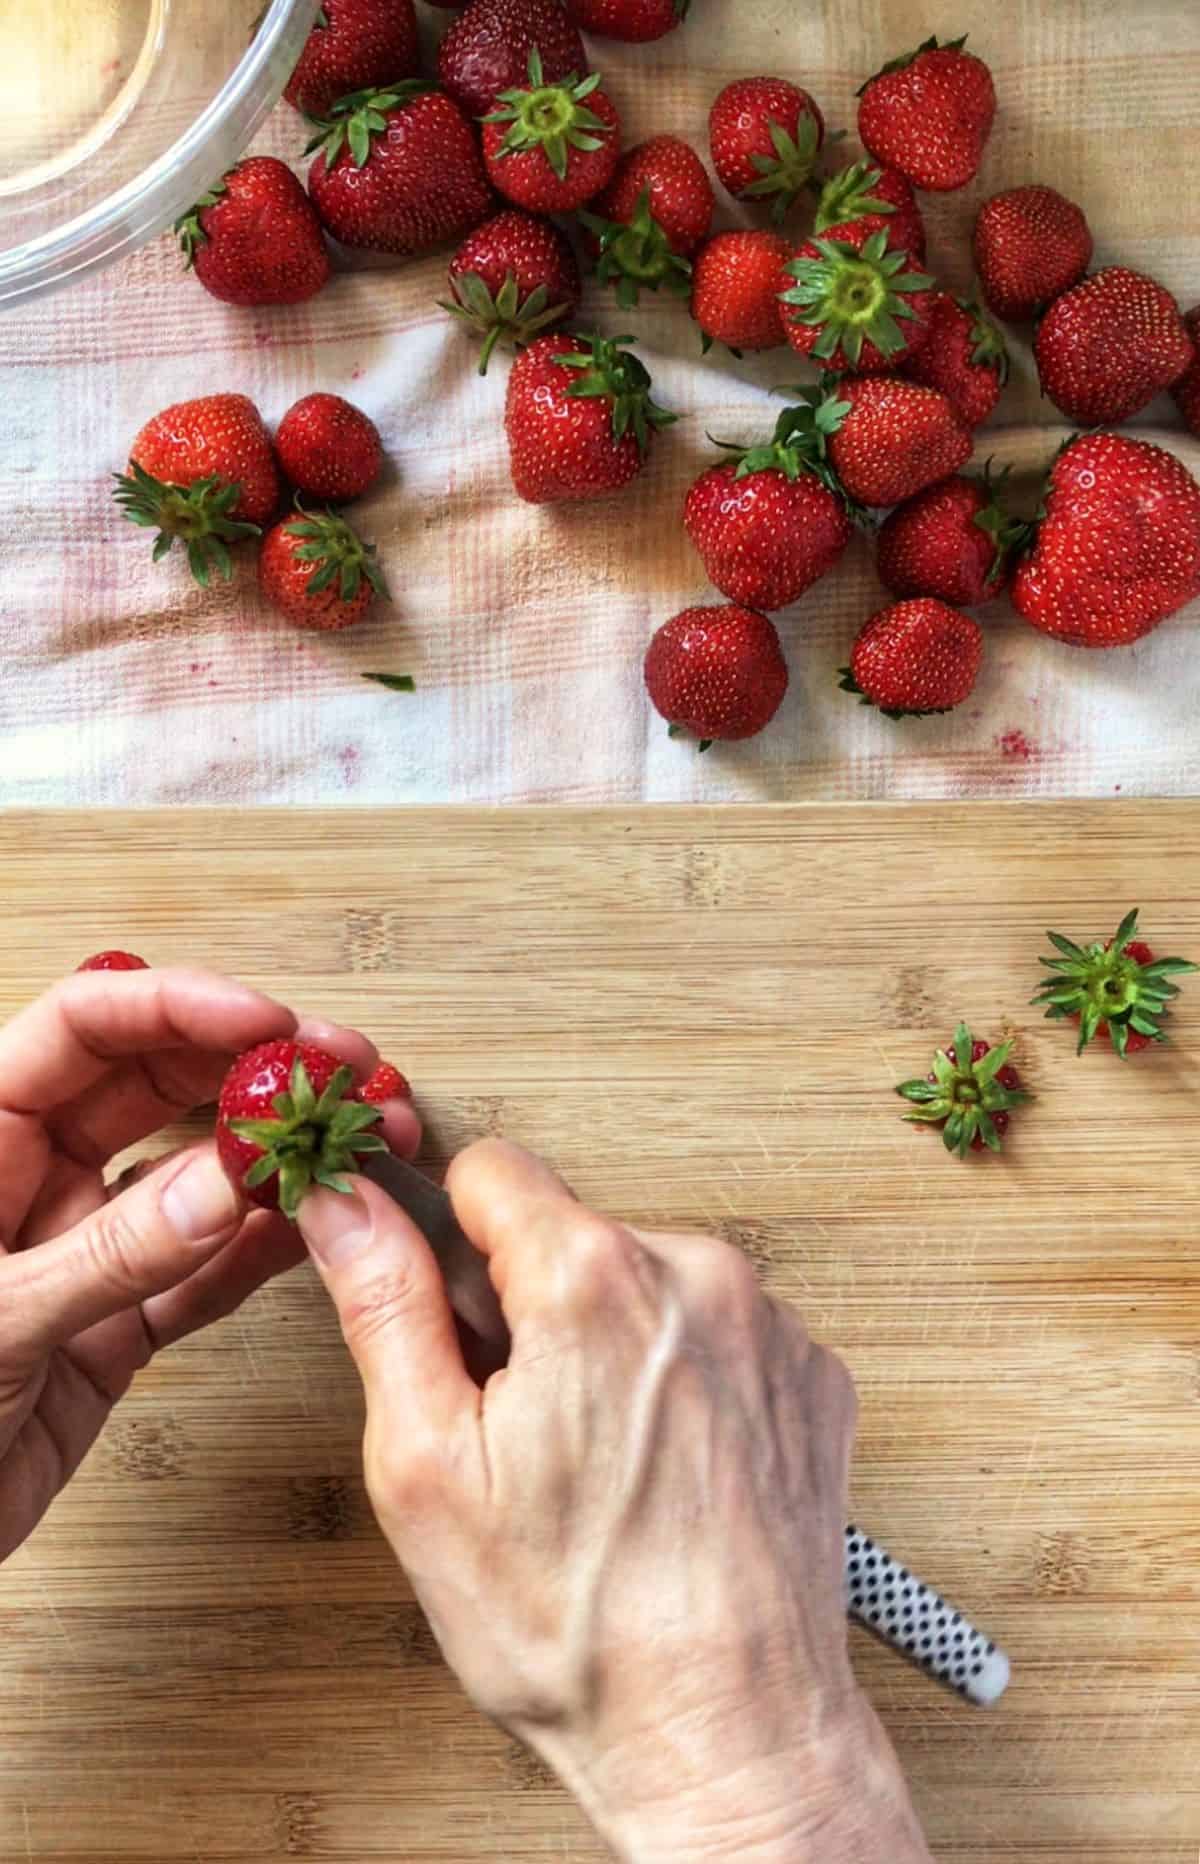 One of the steps on how to freeze strawberries involves the removal of the hull. In this picture, a paring knife is used.